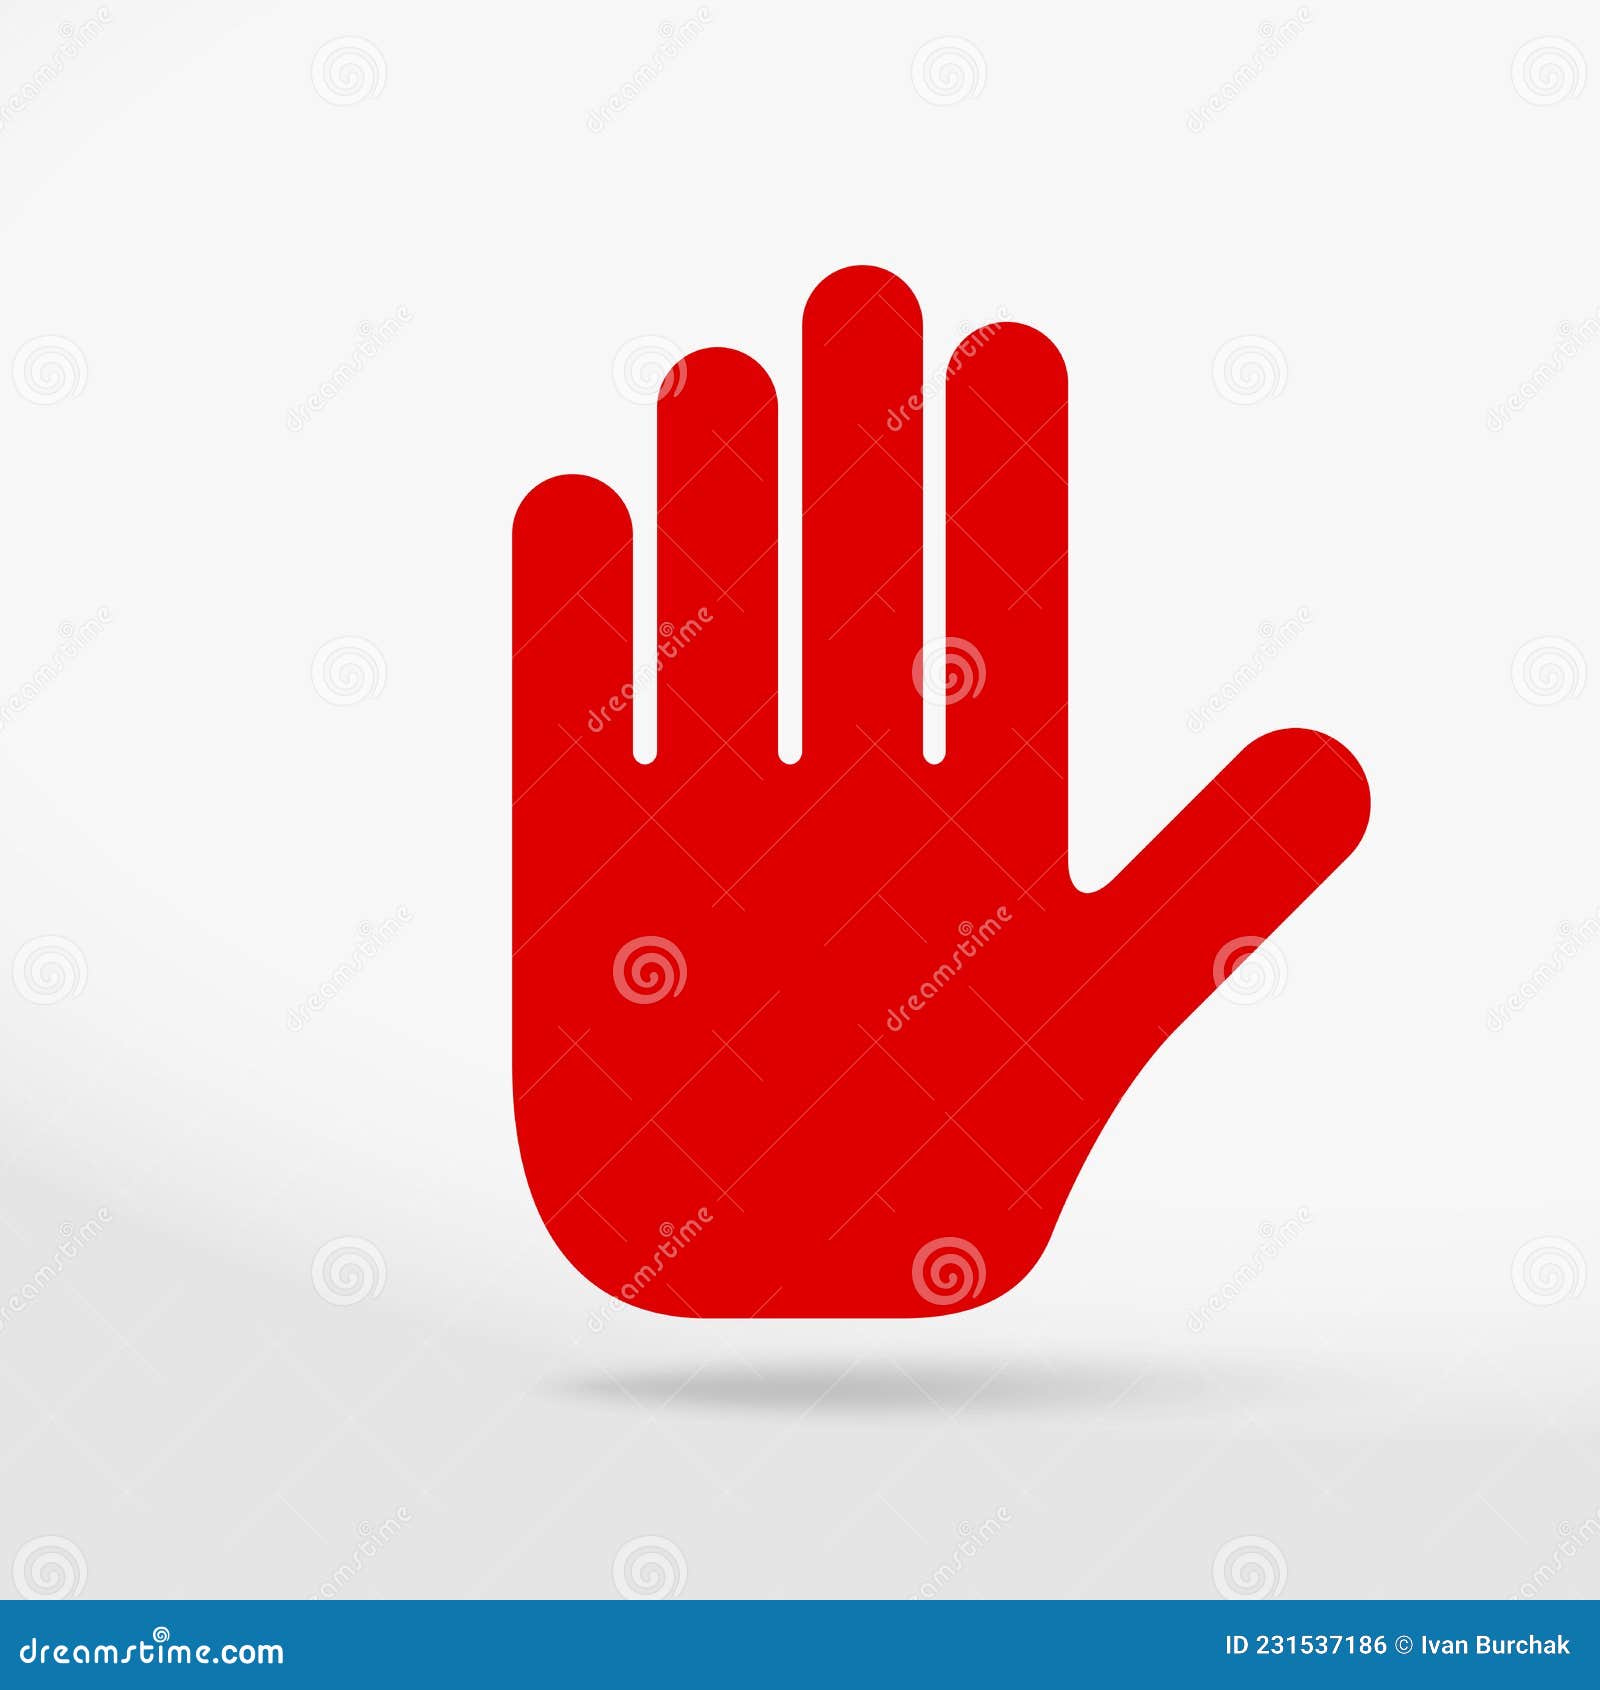 Forbidden sign. Ban icon. Red circle symbol of stop. Prohibited signal.  Vector sign Stock Vector